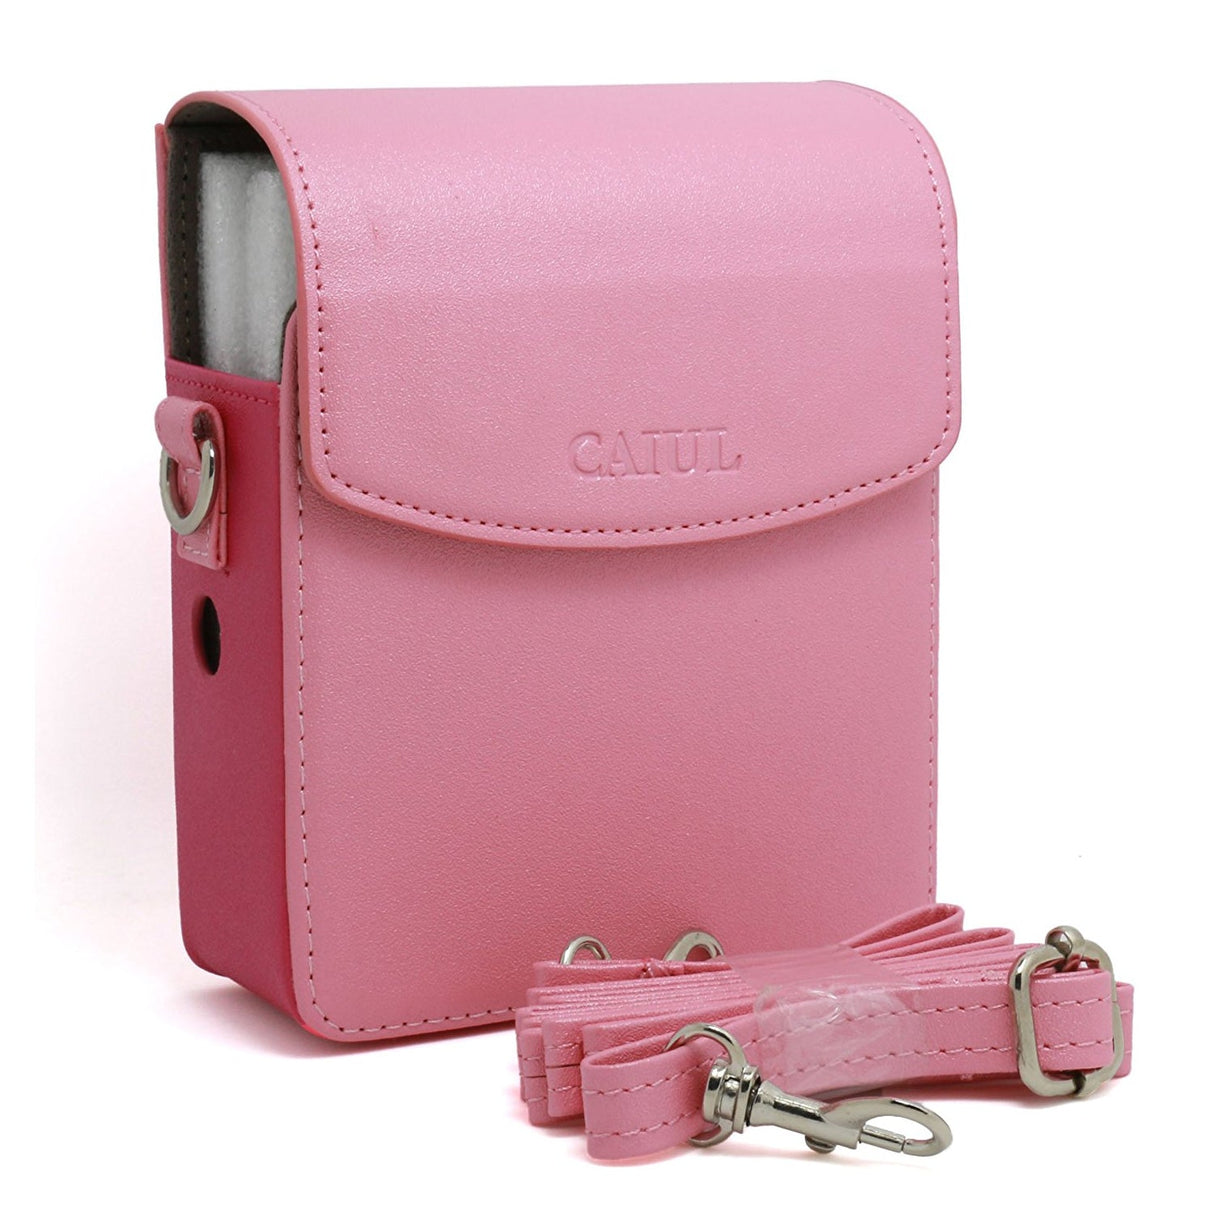 CAIUL PU Leather Case for Fujifilm Instax Share Smartphone Printer Sp1, Pink